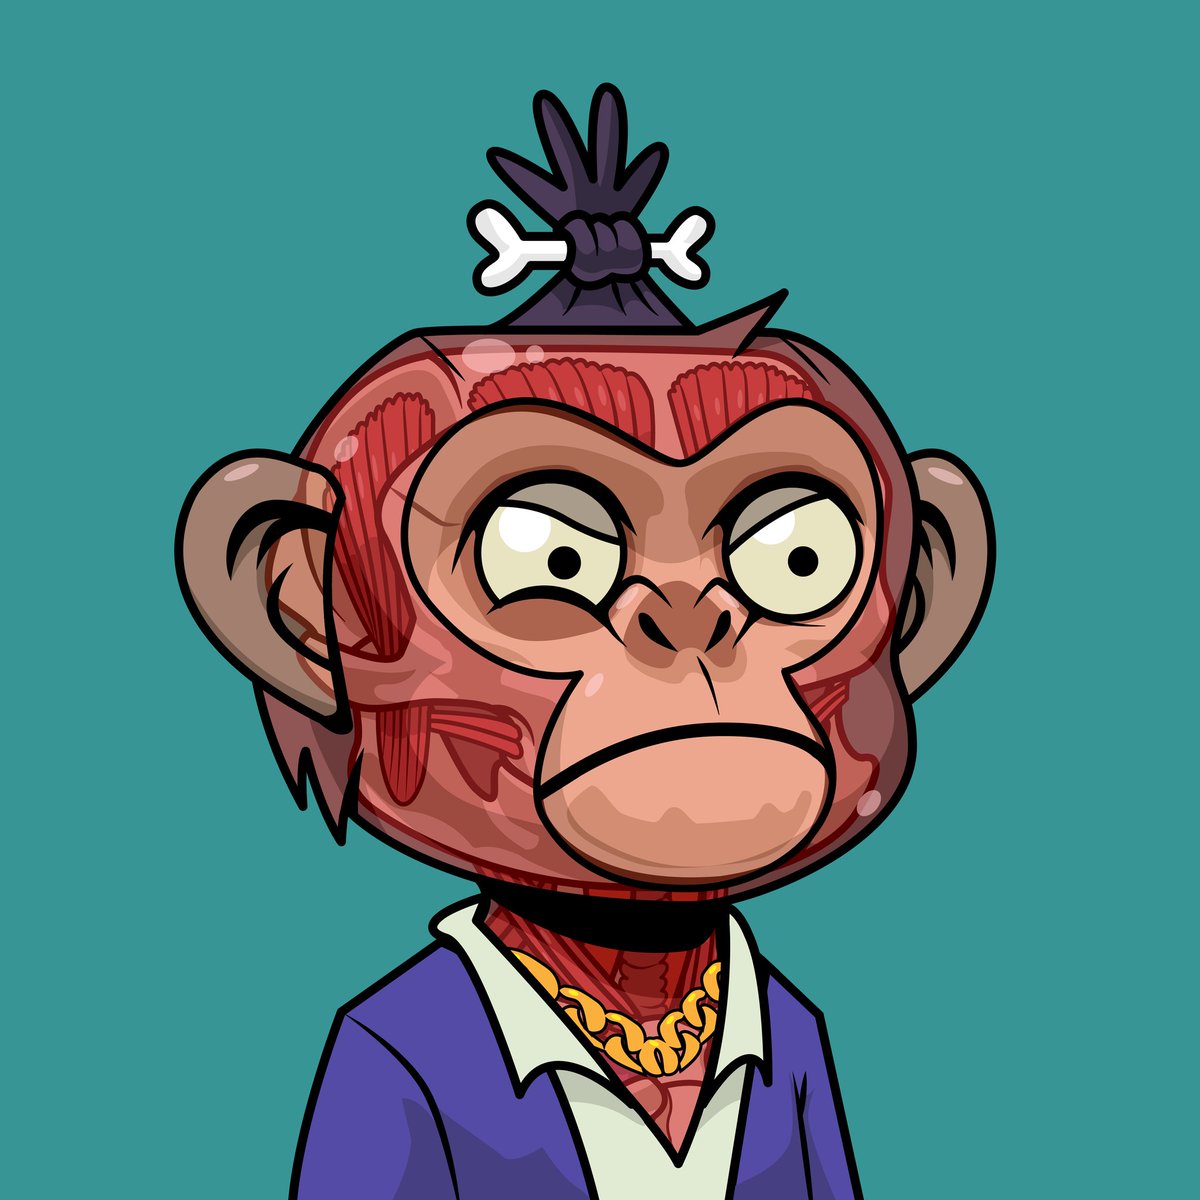 @CryptoLeki @CronosChimpClub I missed the mint fun but I was with chimps November 21 also. 🐒,🐒
Here is one of my earliest chimps. 💎🙌
#chimpsroamtogether #crofam ❤️